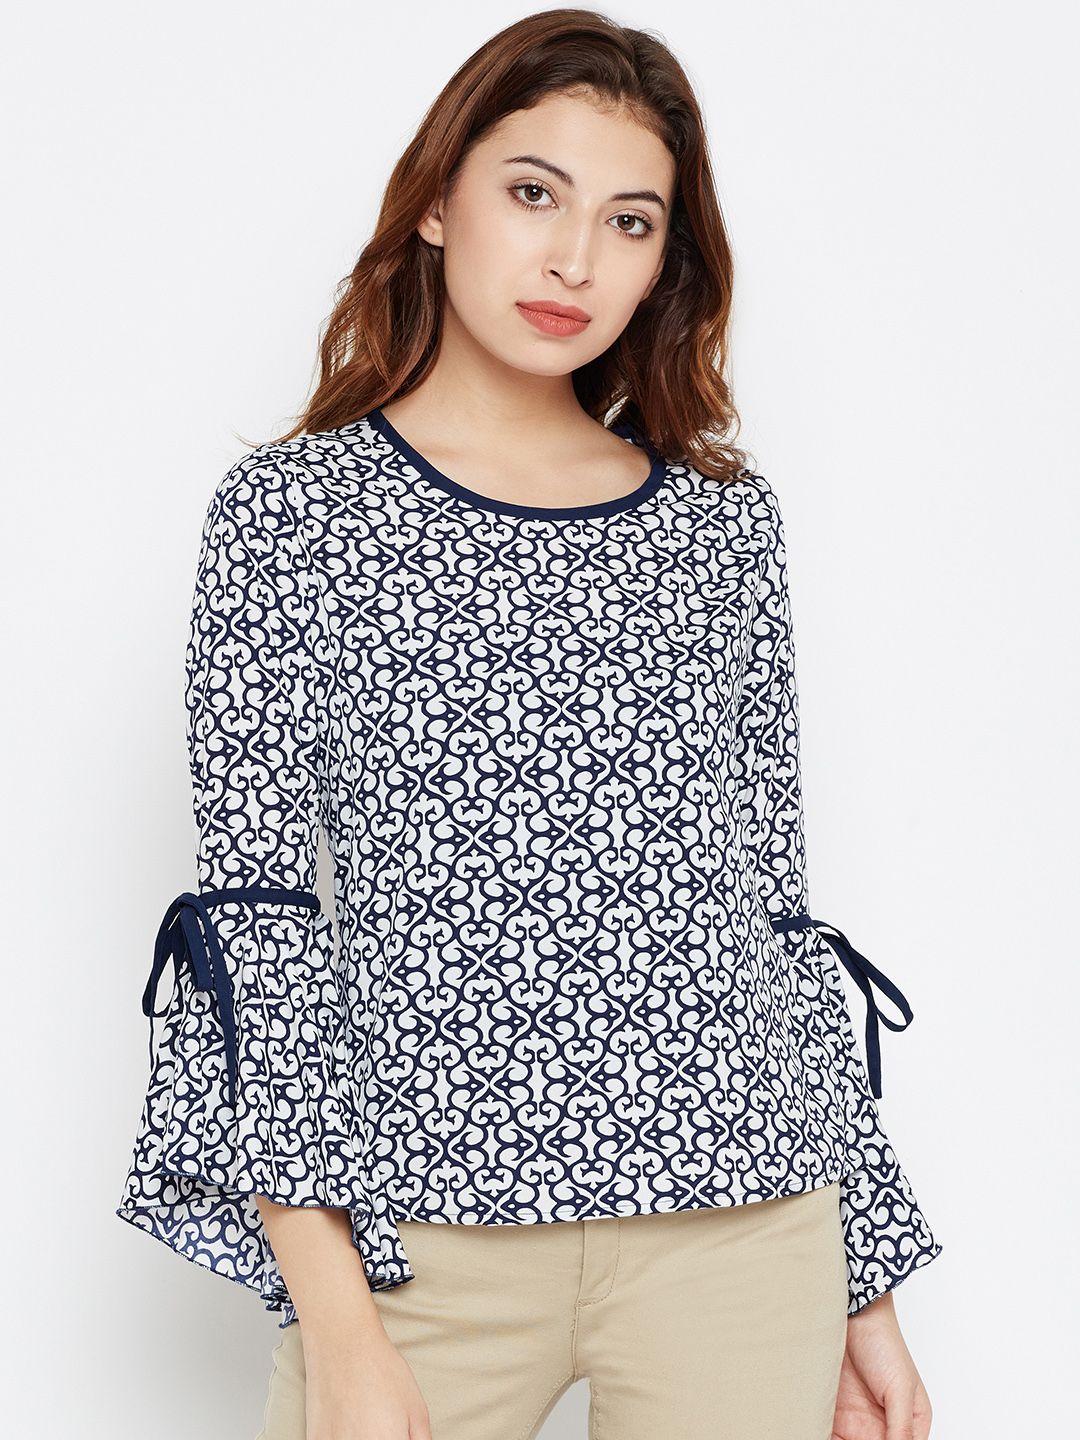 style-quotient-women-white-&-navy-printed-top